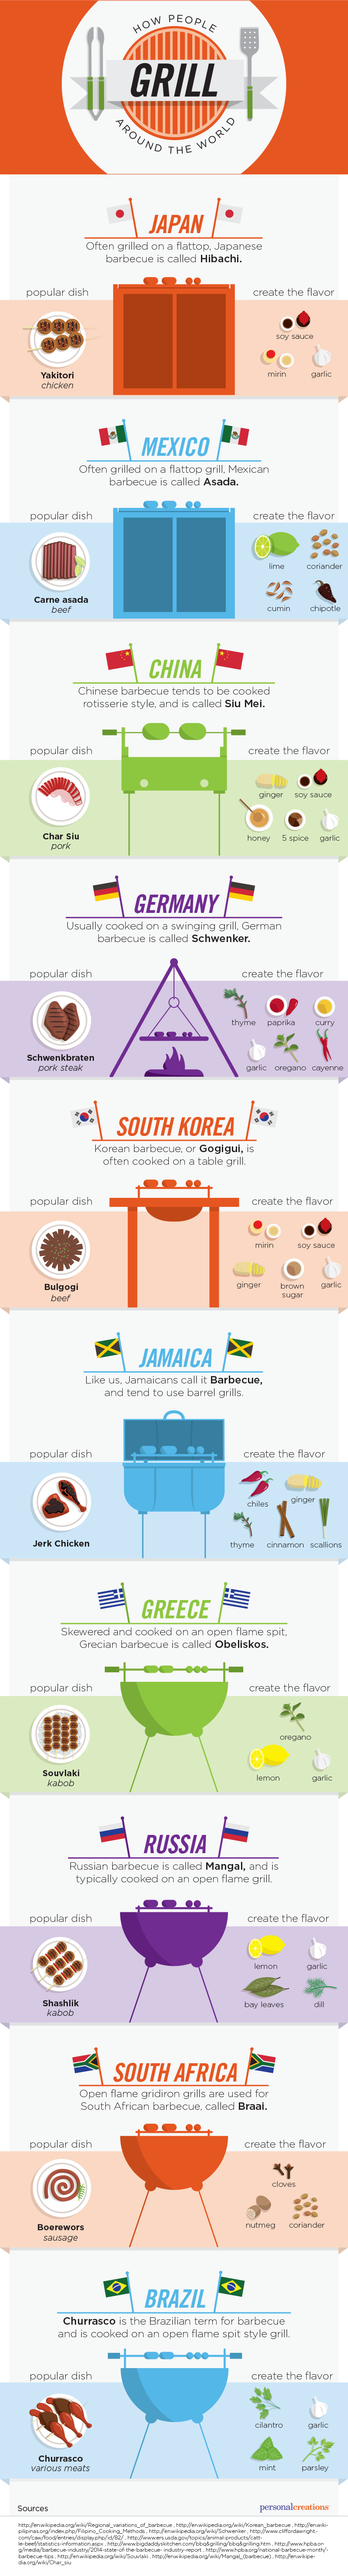 How People Grill Around the World